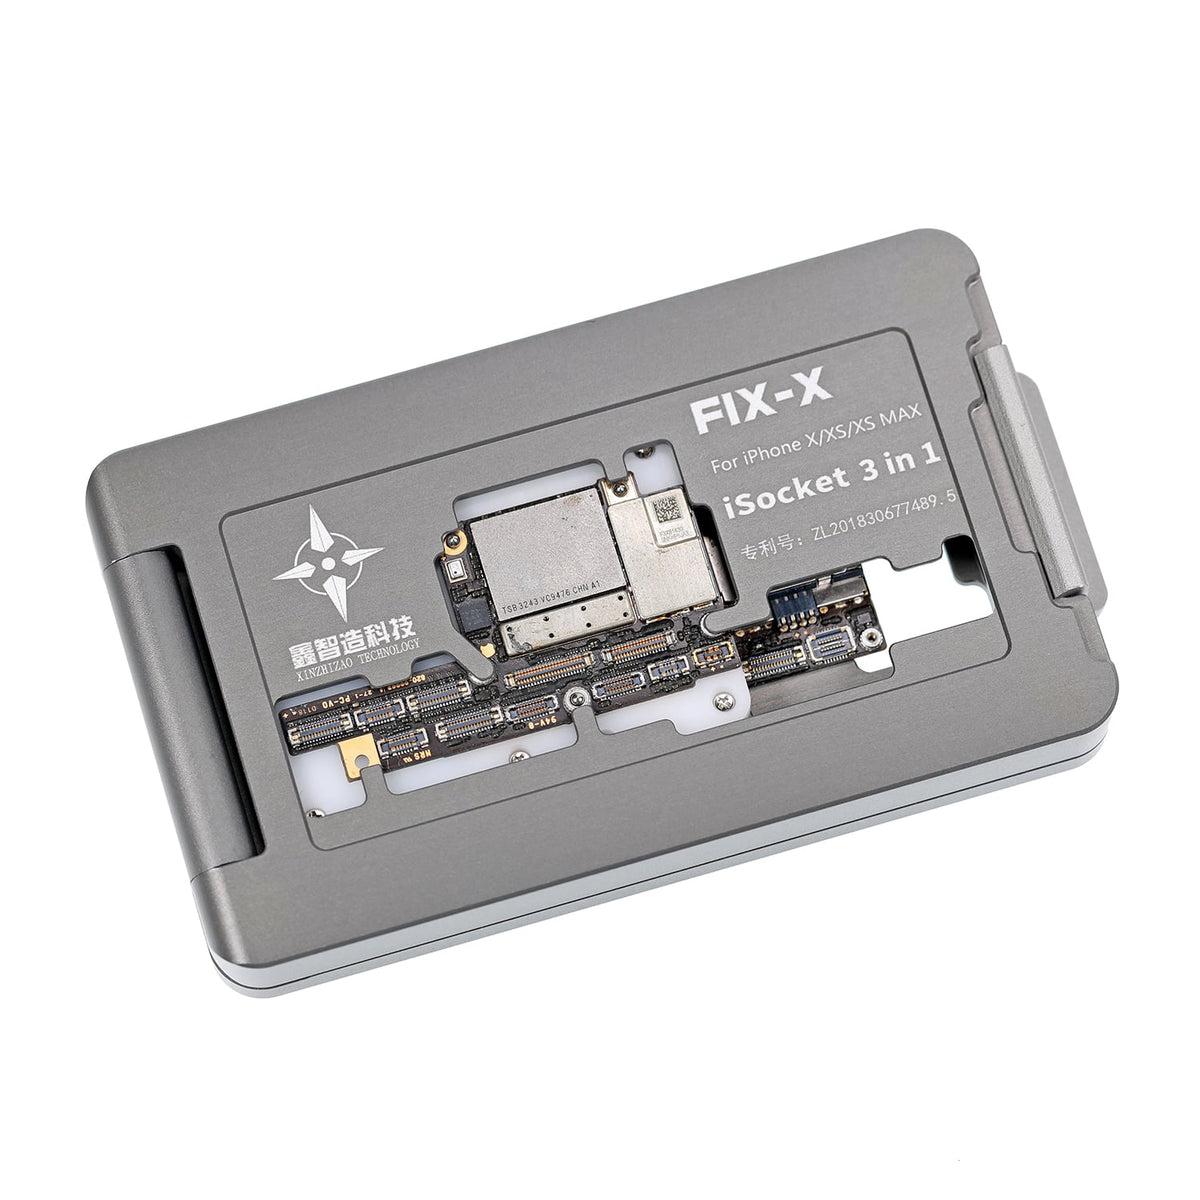 FIX-X ISOCKET LAYER LOGIC MOTHERBOARD TEST FIXTURE FOR IPHONE X PCB REPAIR